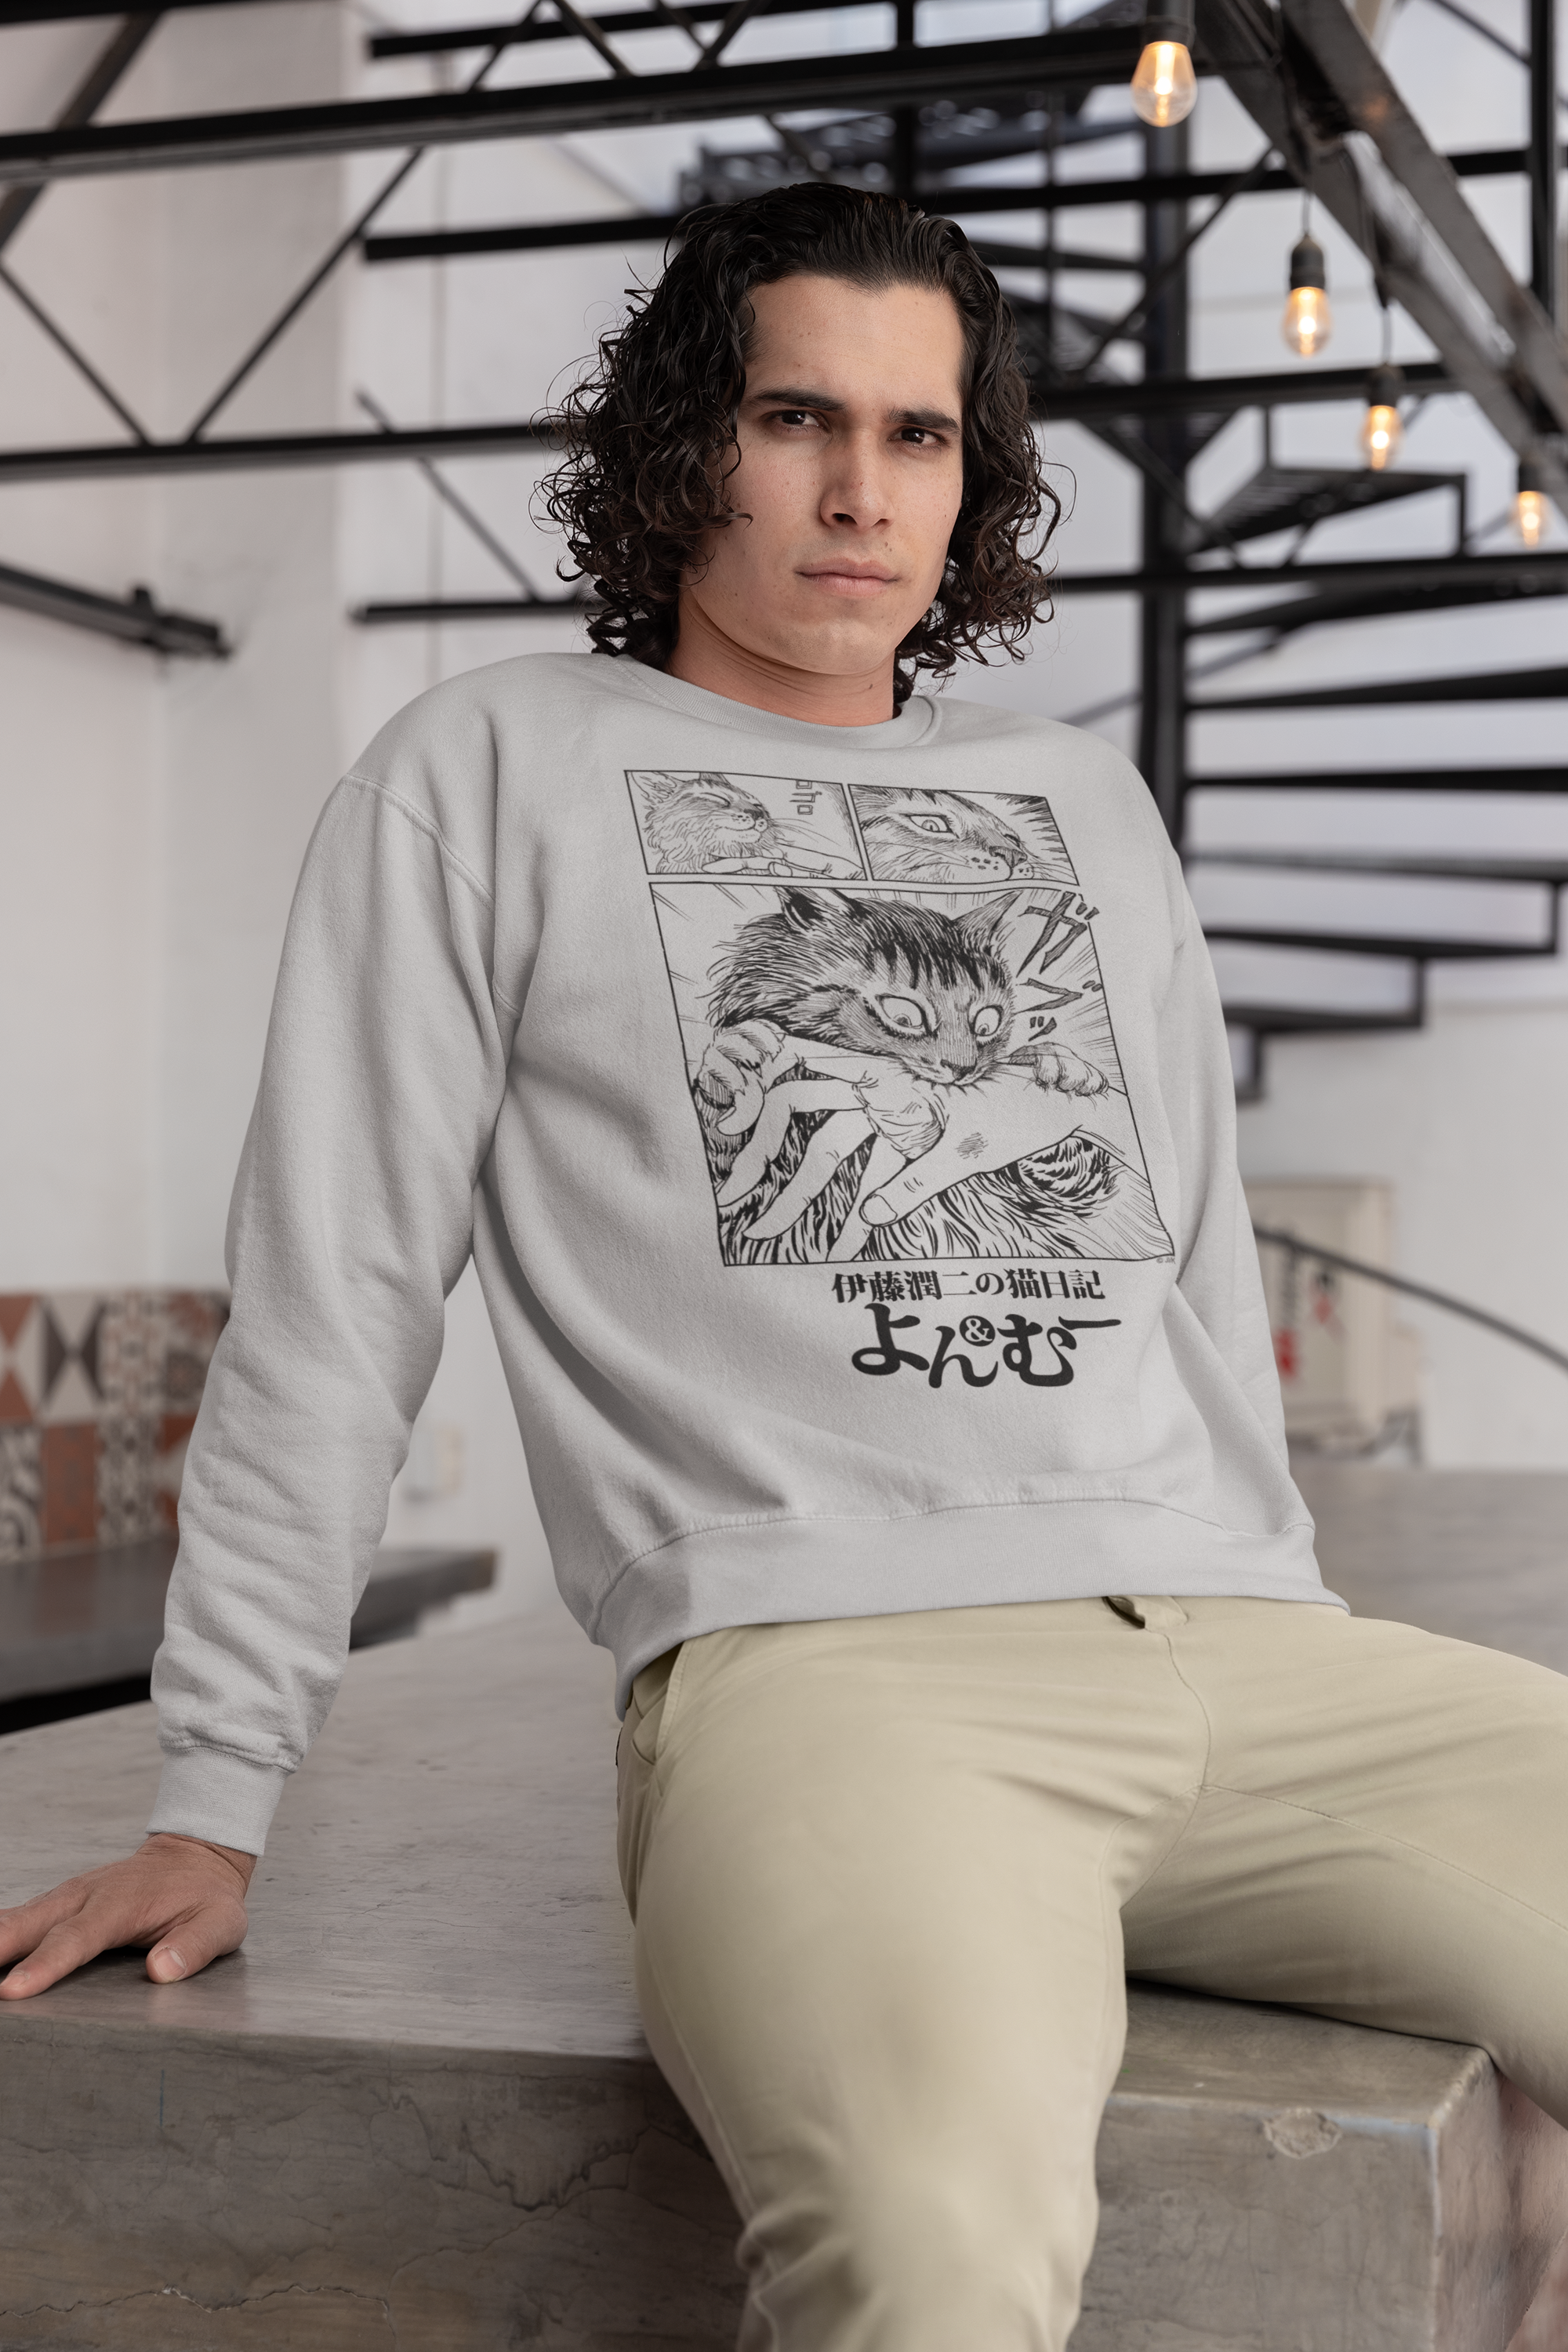 gildan-sweatshirt-mockup-featuring-a-man-with-a-serious-look-m33133.png